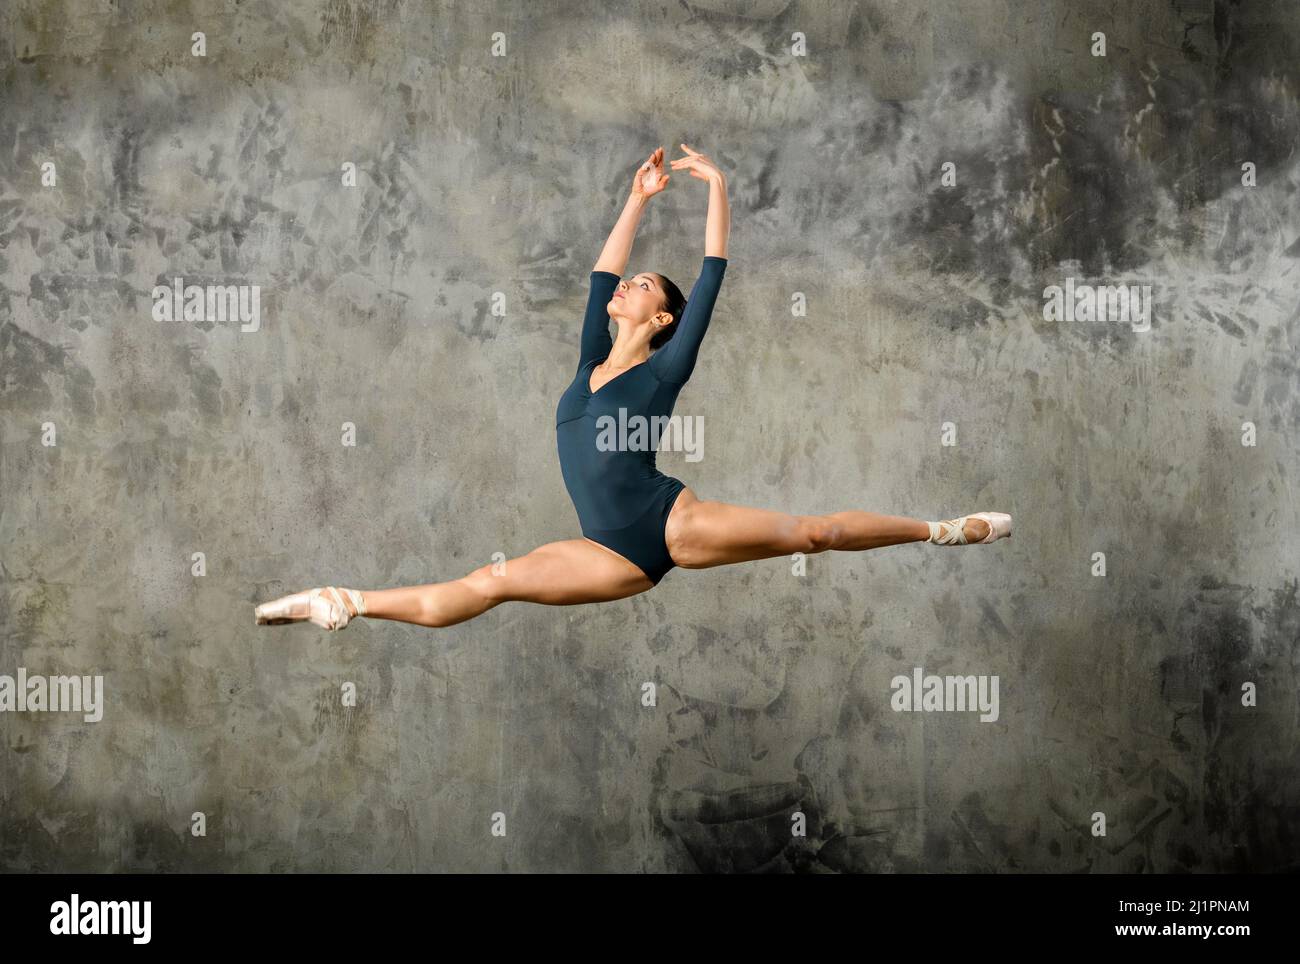 Full body of graceful female ballet instructor in bodysuit and pointe shoes showing gran jete classical jump against gray concrete wall Stock Photo